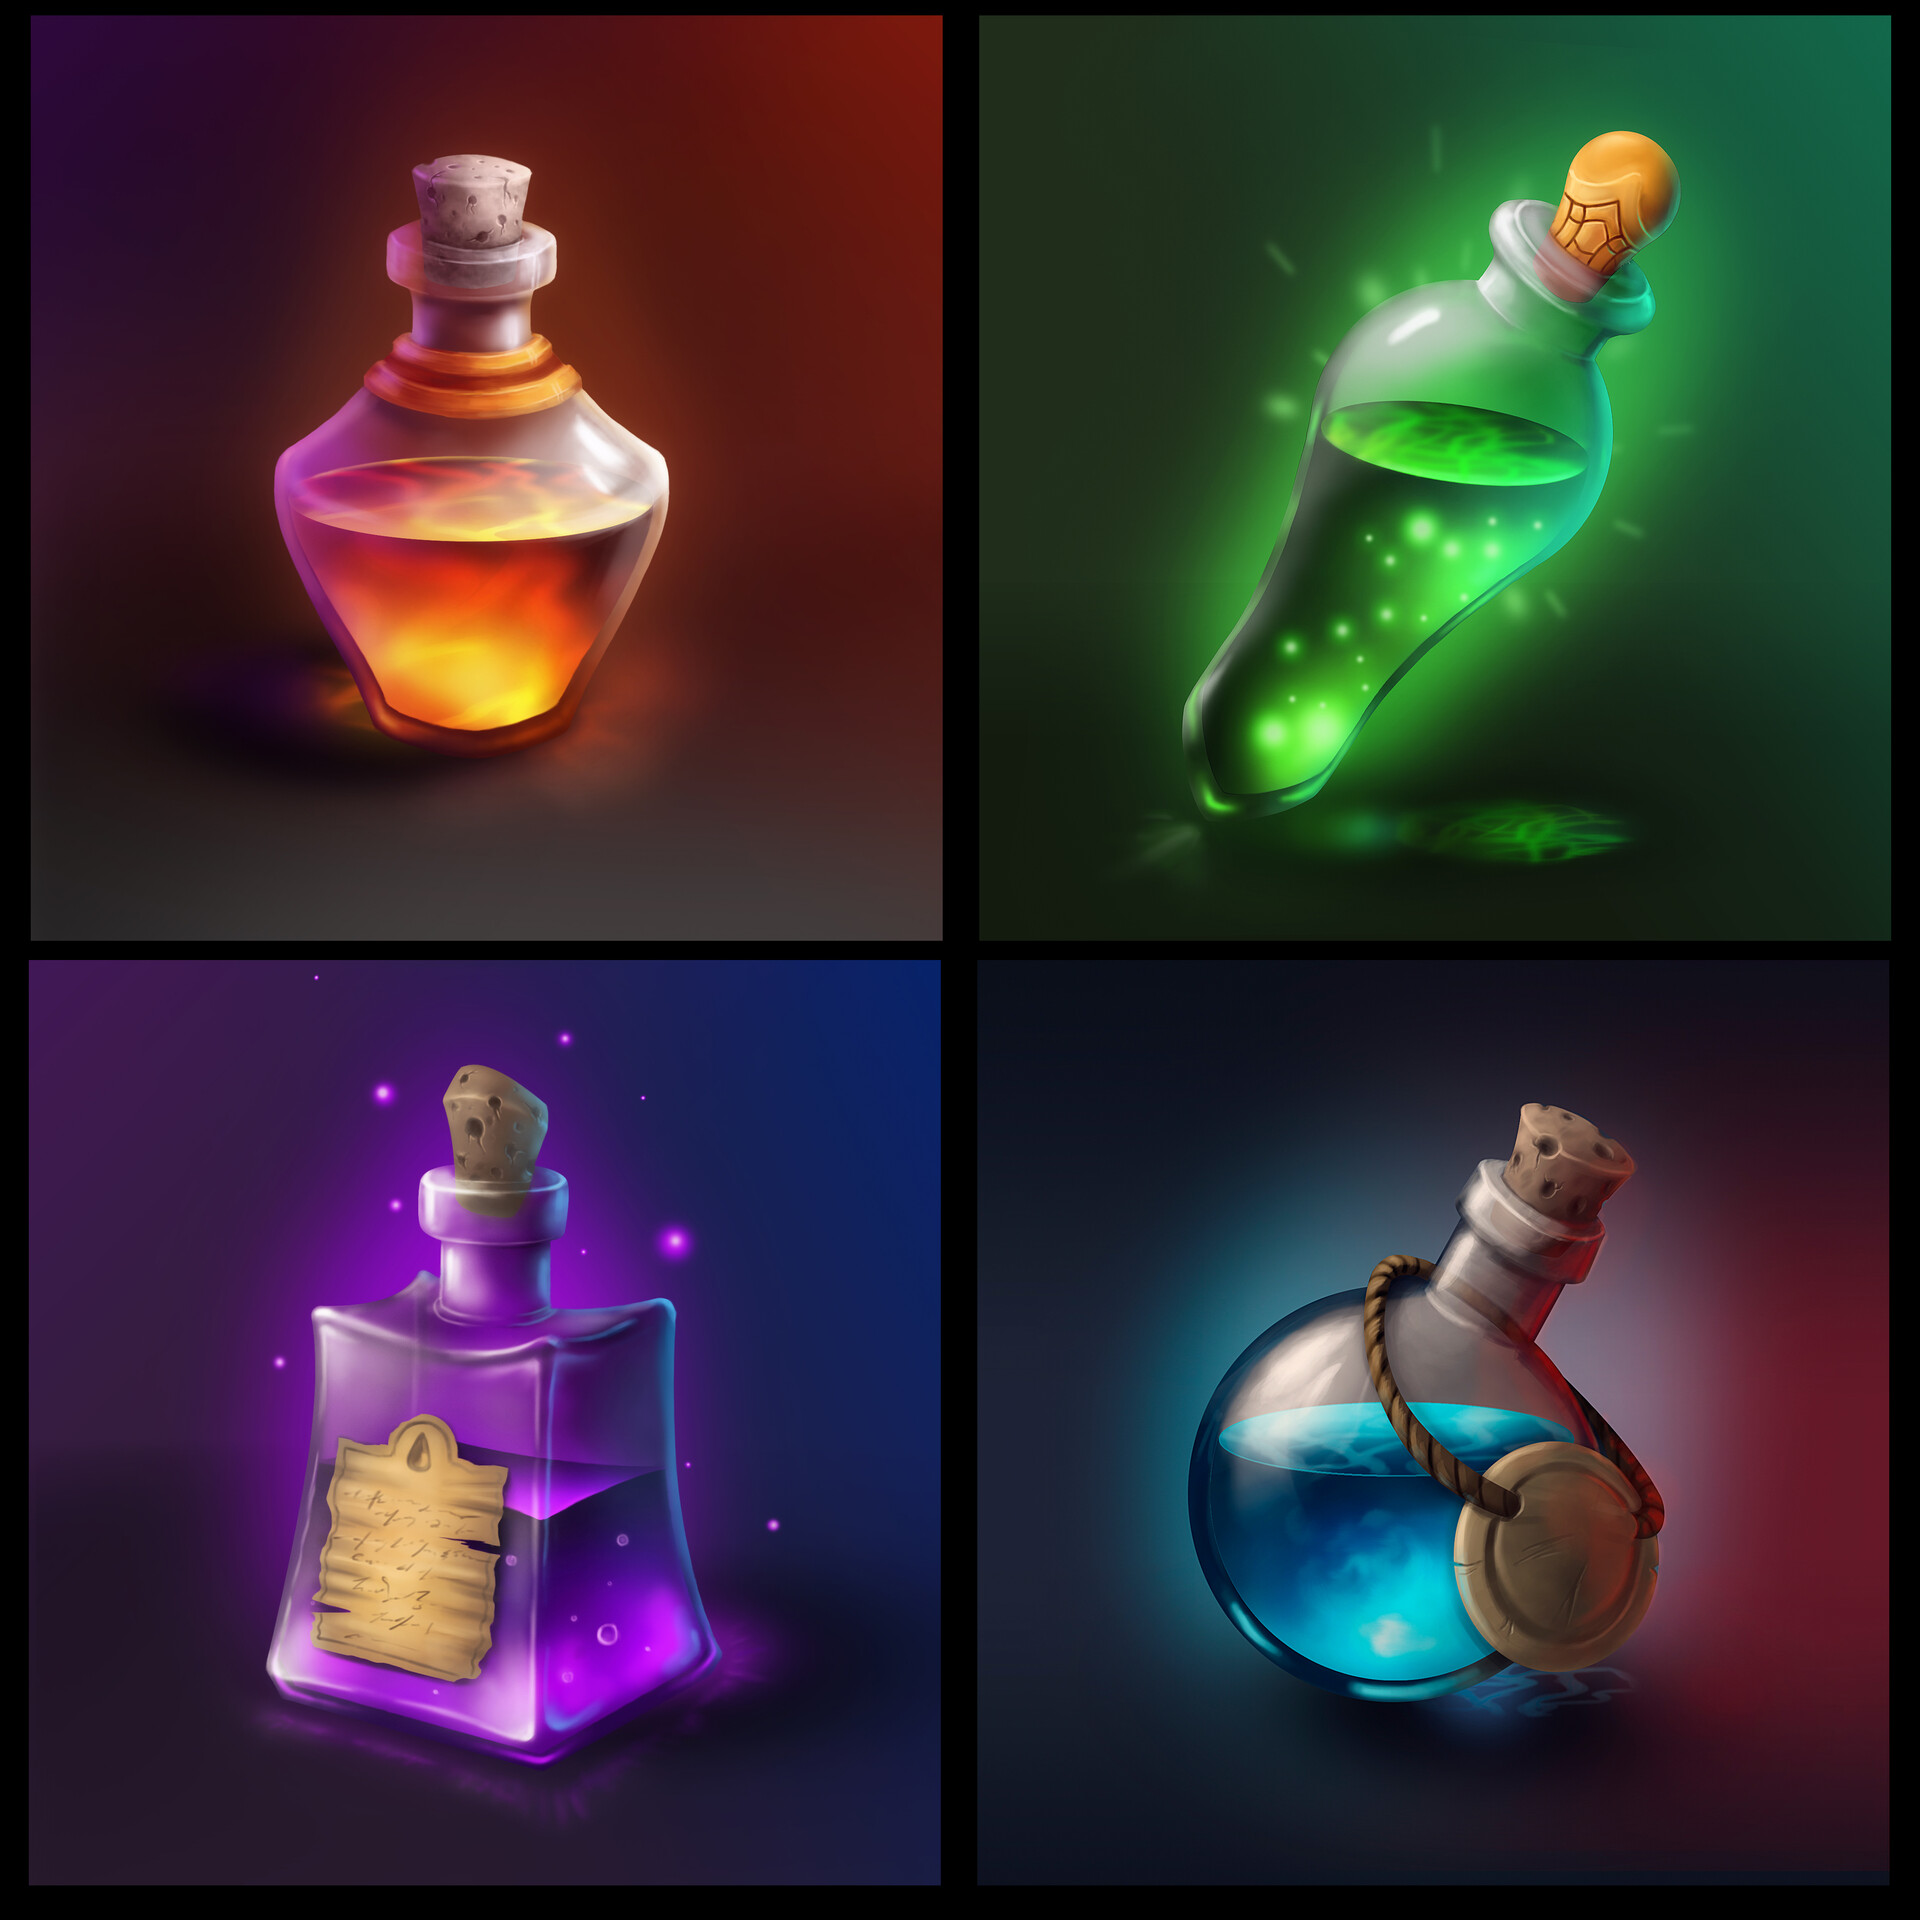 Icons potions